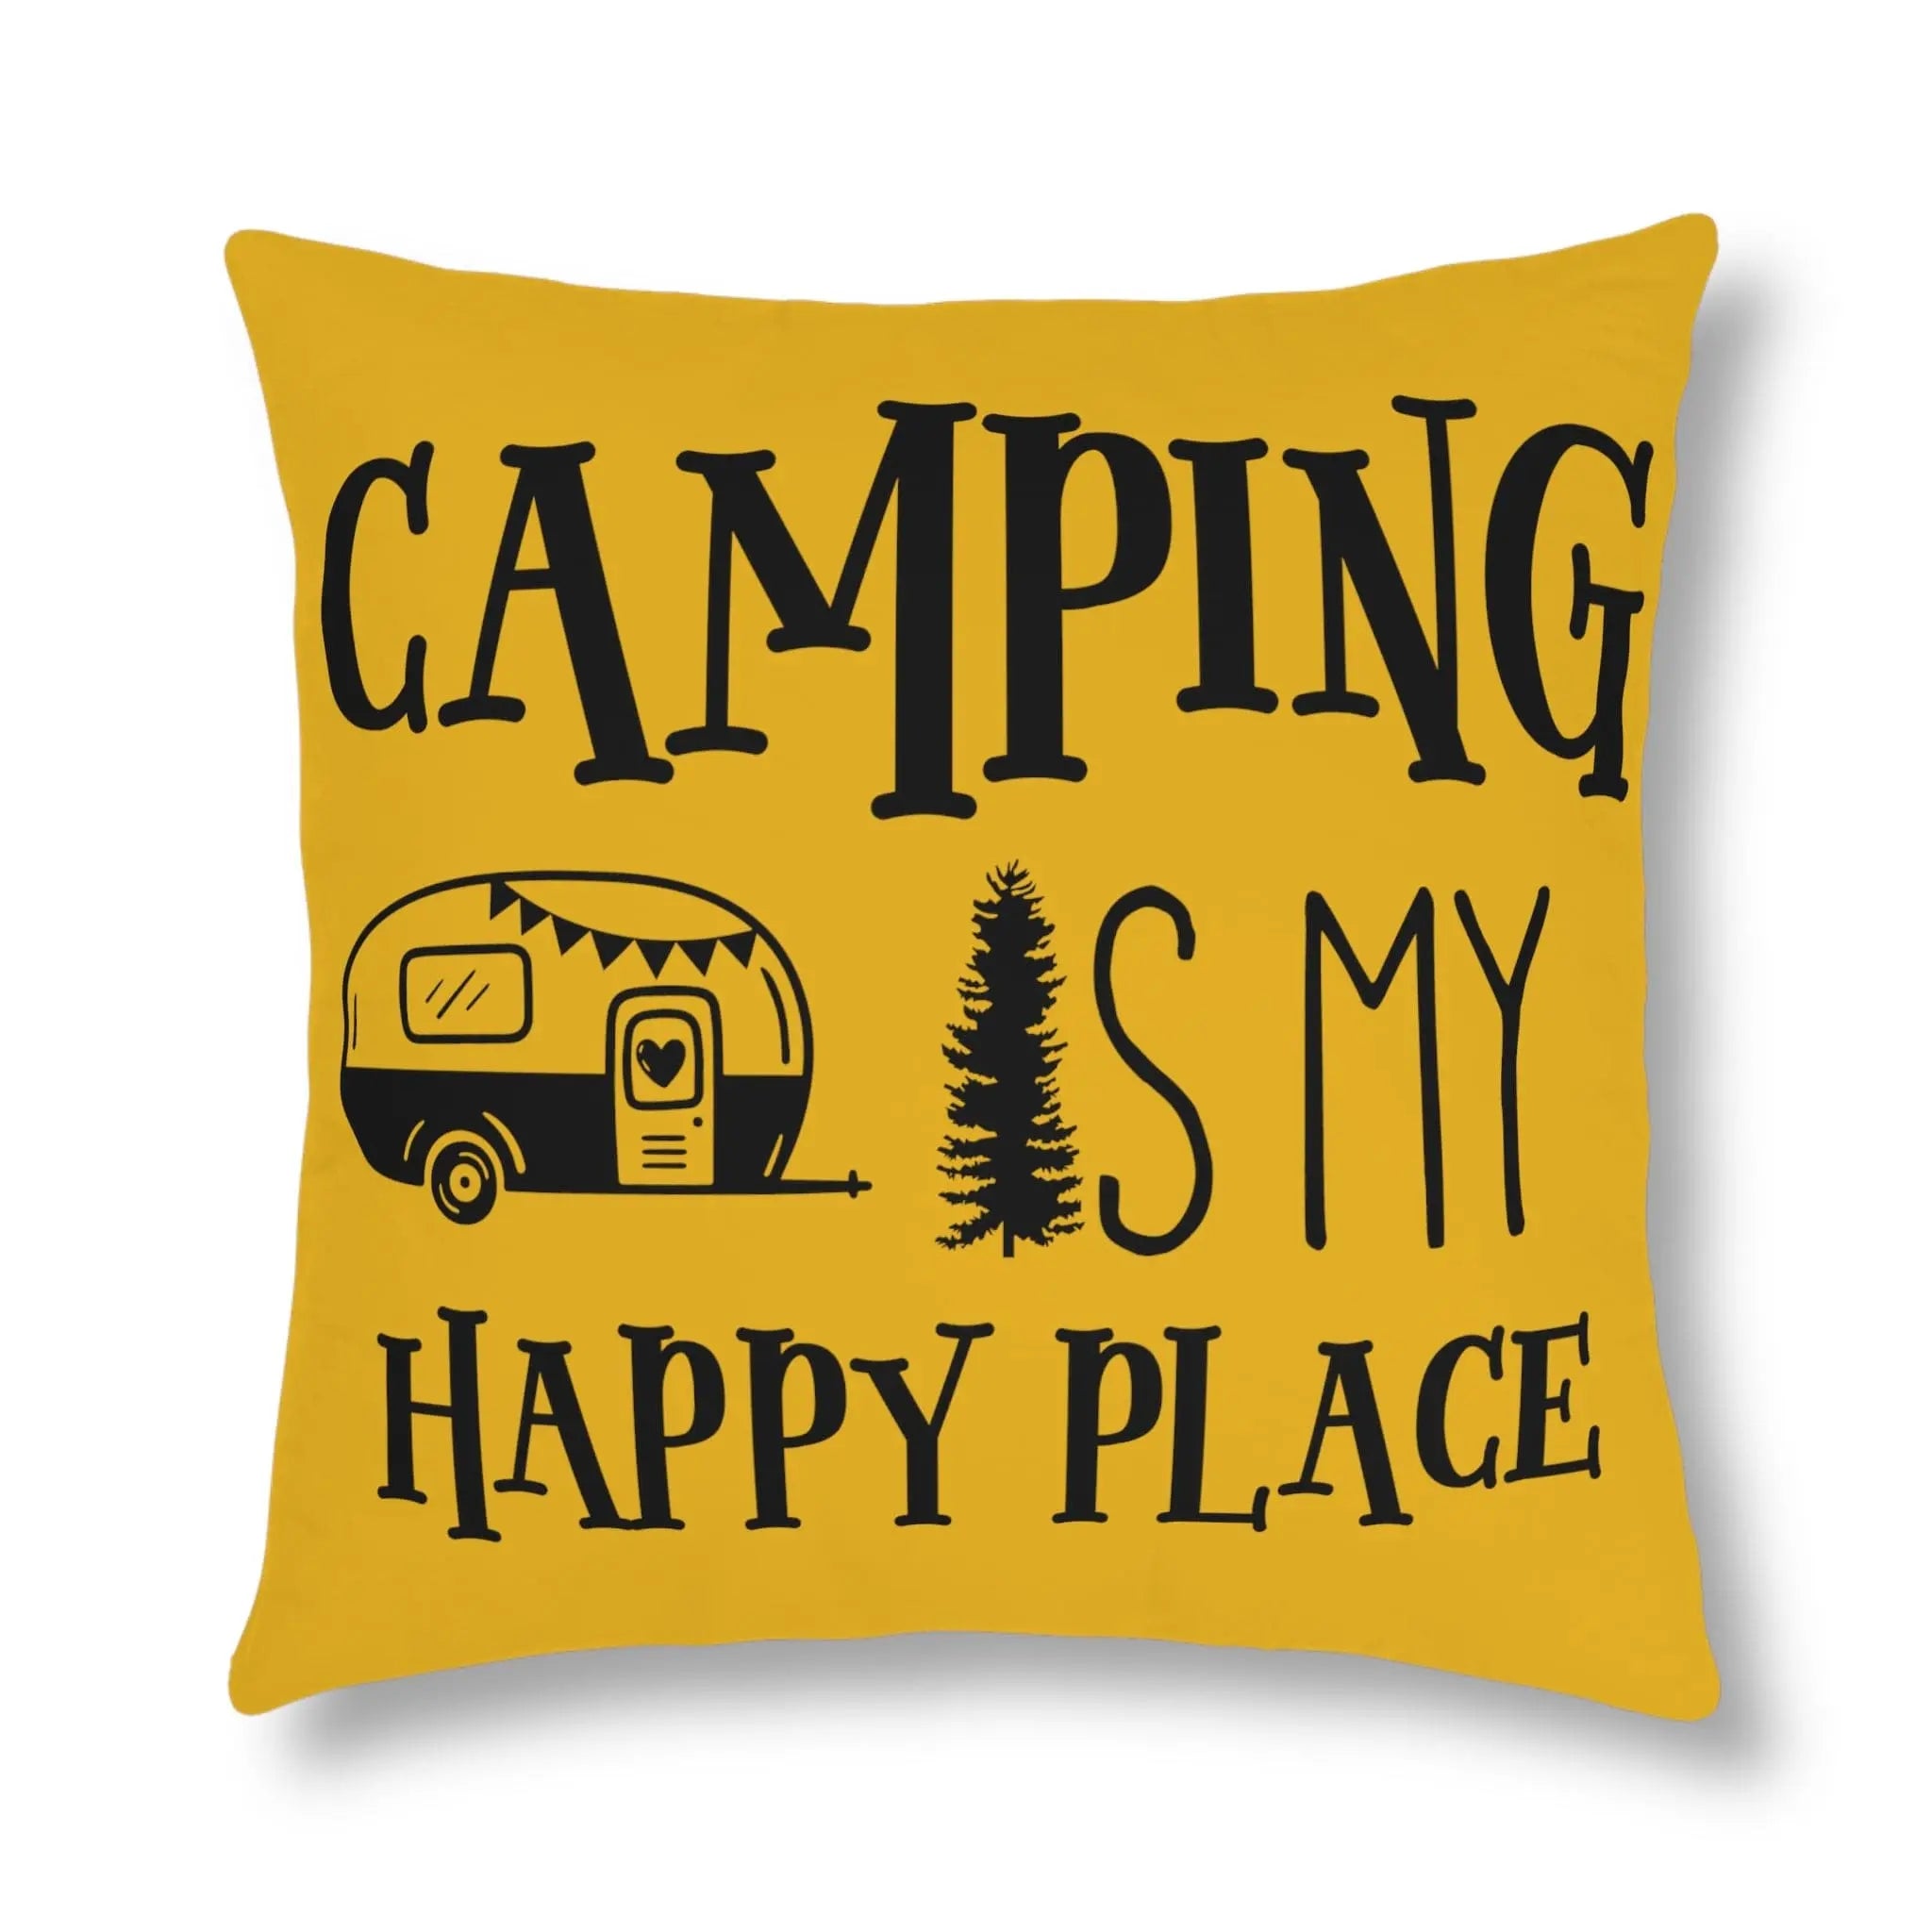 Camping Is My Happy Place Waterproof Pillow and Pillow Cover With Concealed Zipper